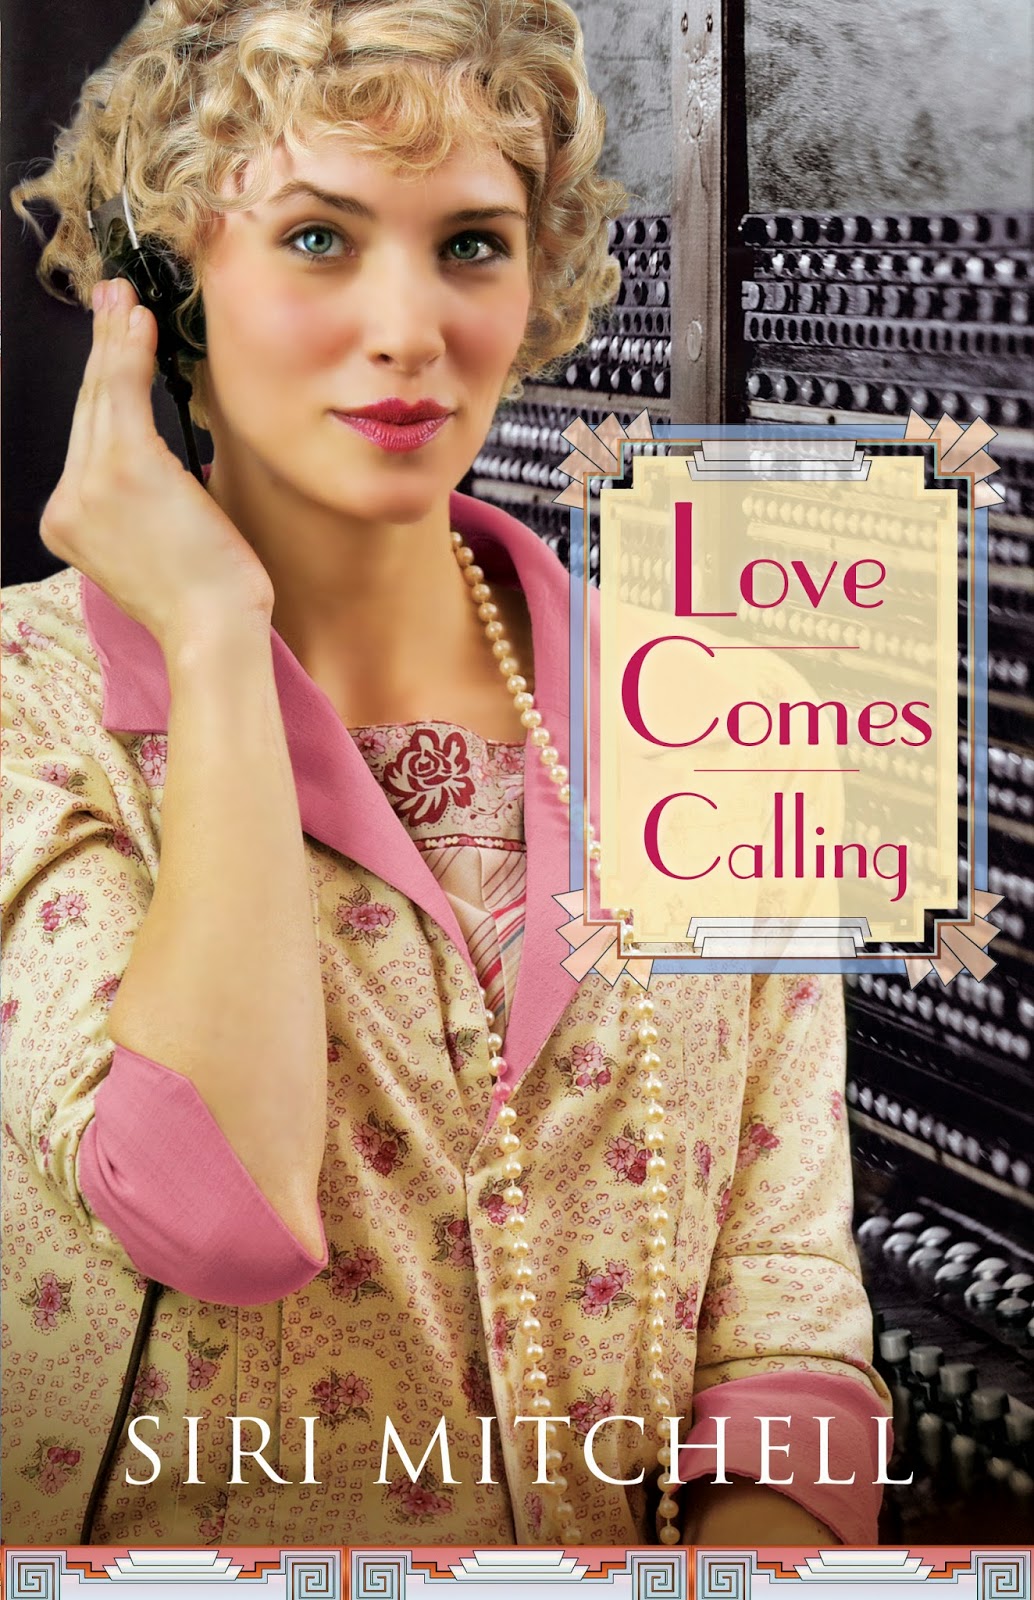 booktalk-more-review-love-comes-calling-by-siri-mitchell